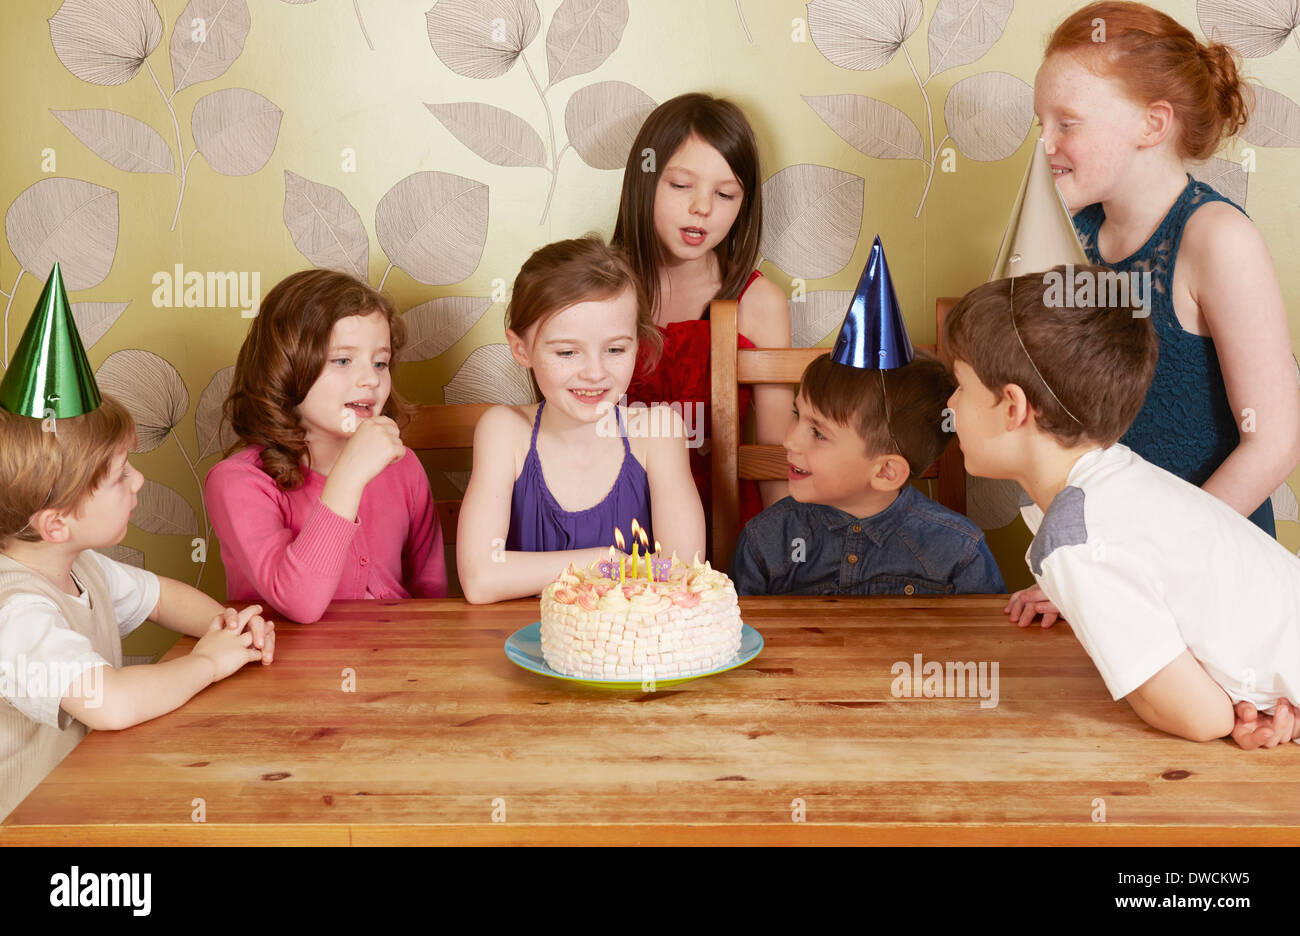 Children at birthday party, girl with cake Stock Photo